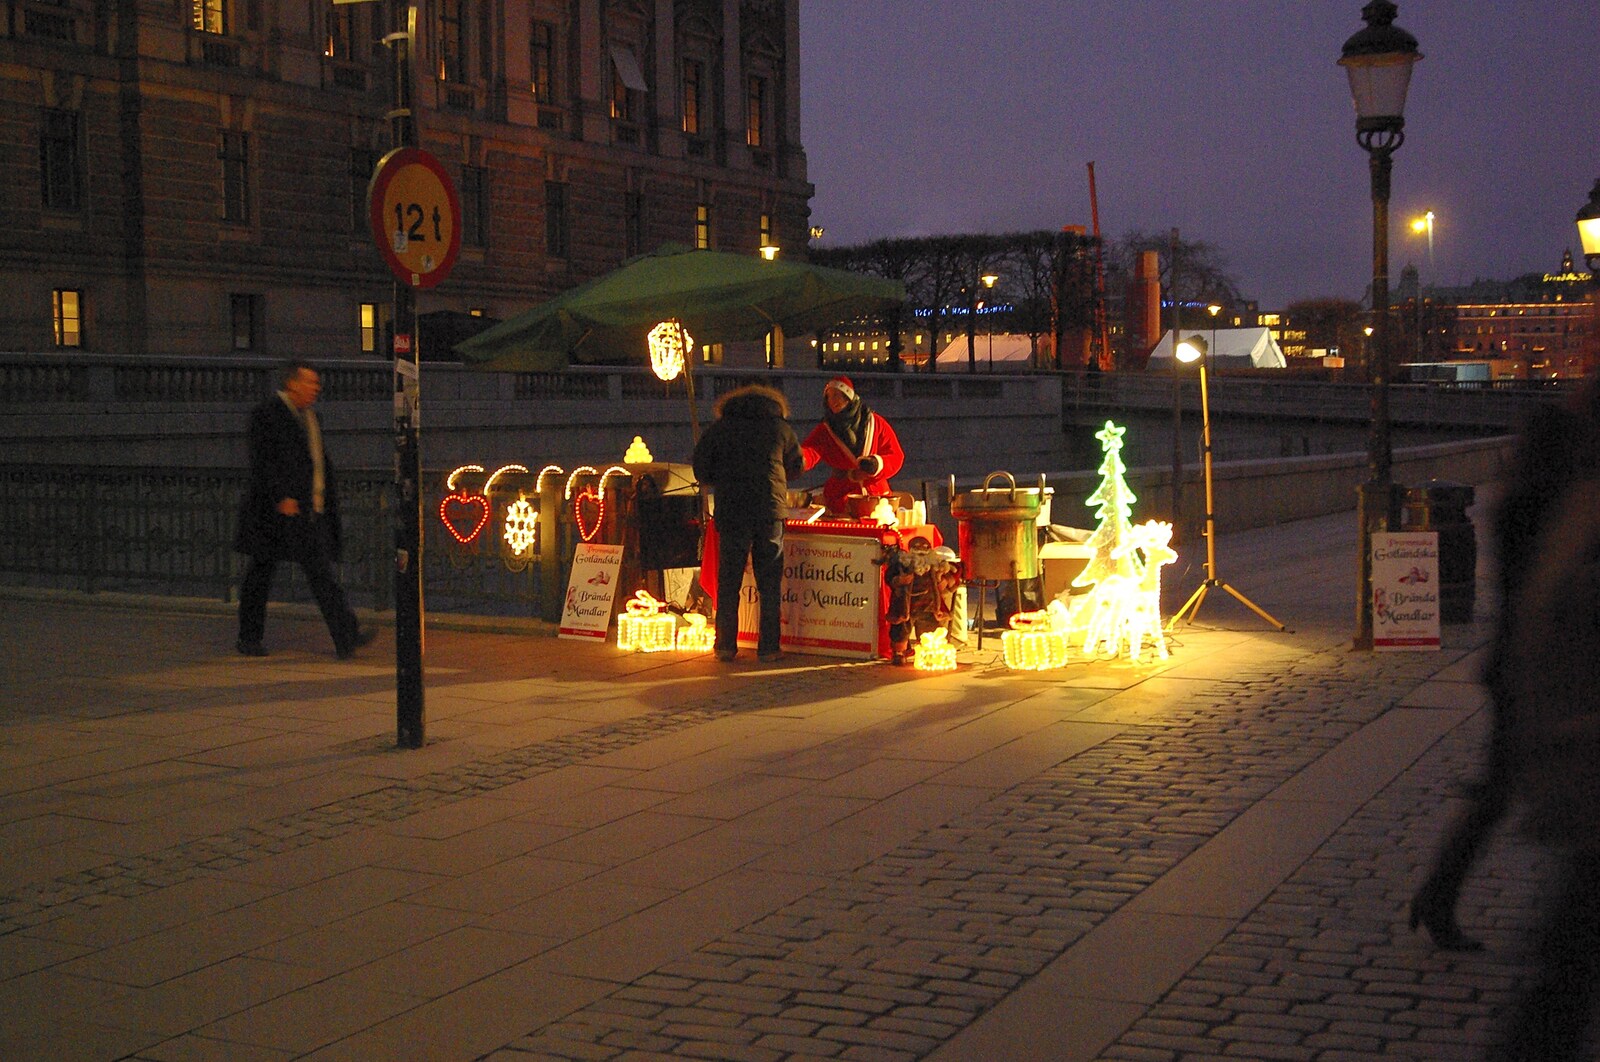 The Christmas stall in the dark from Gamla Stan, Stockholm, Sweden - 15th December 2007